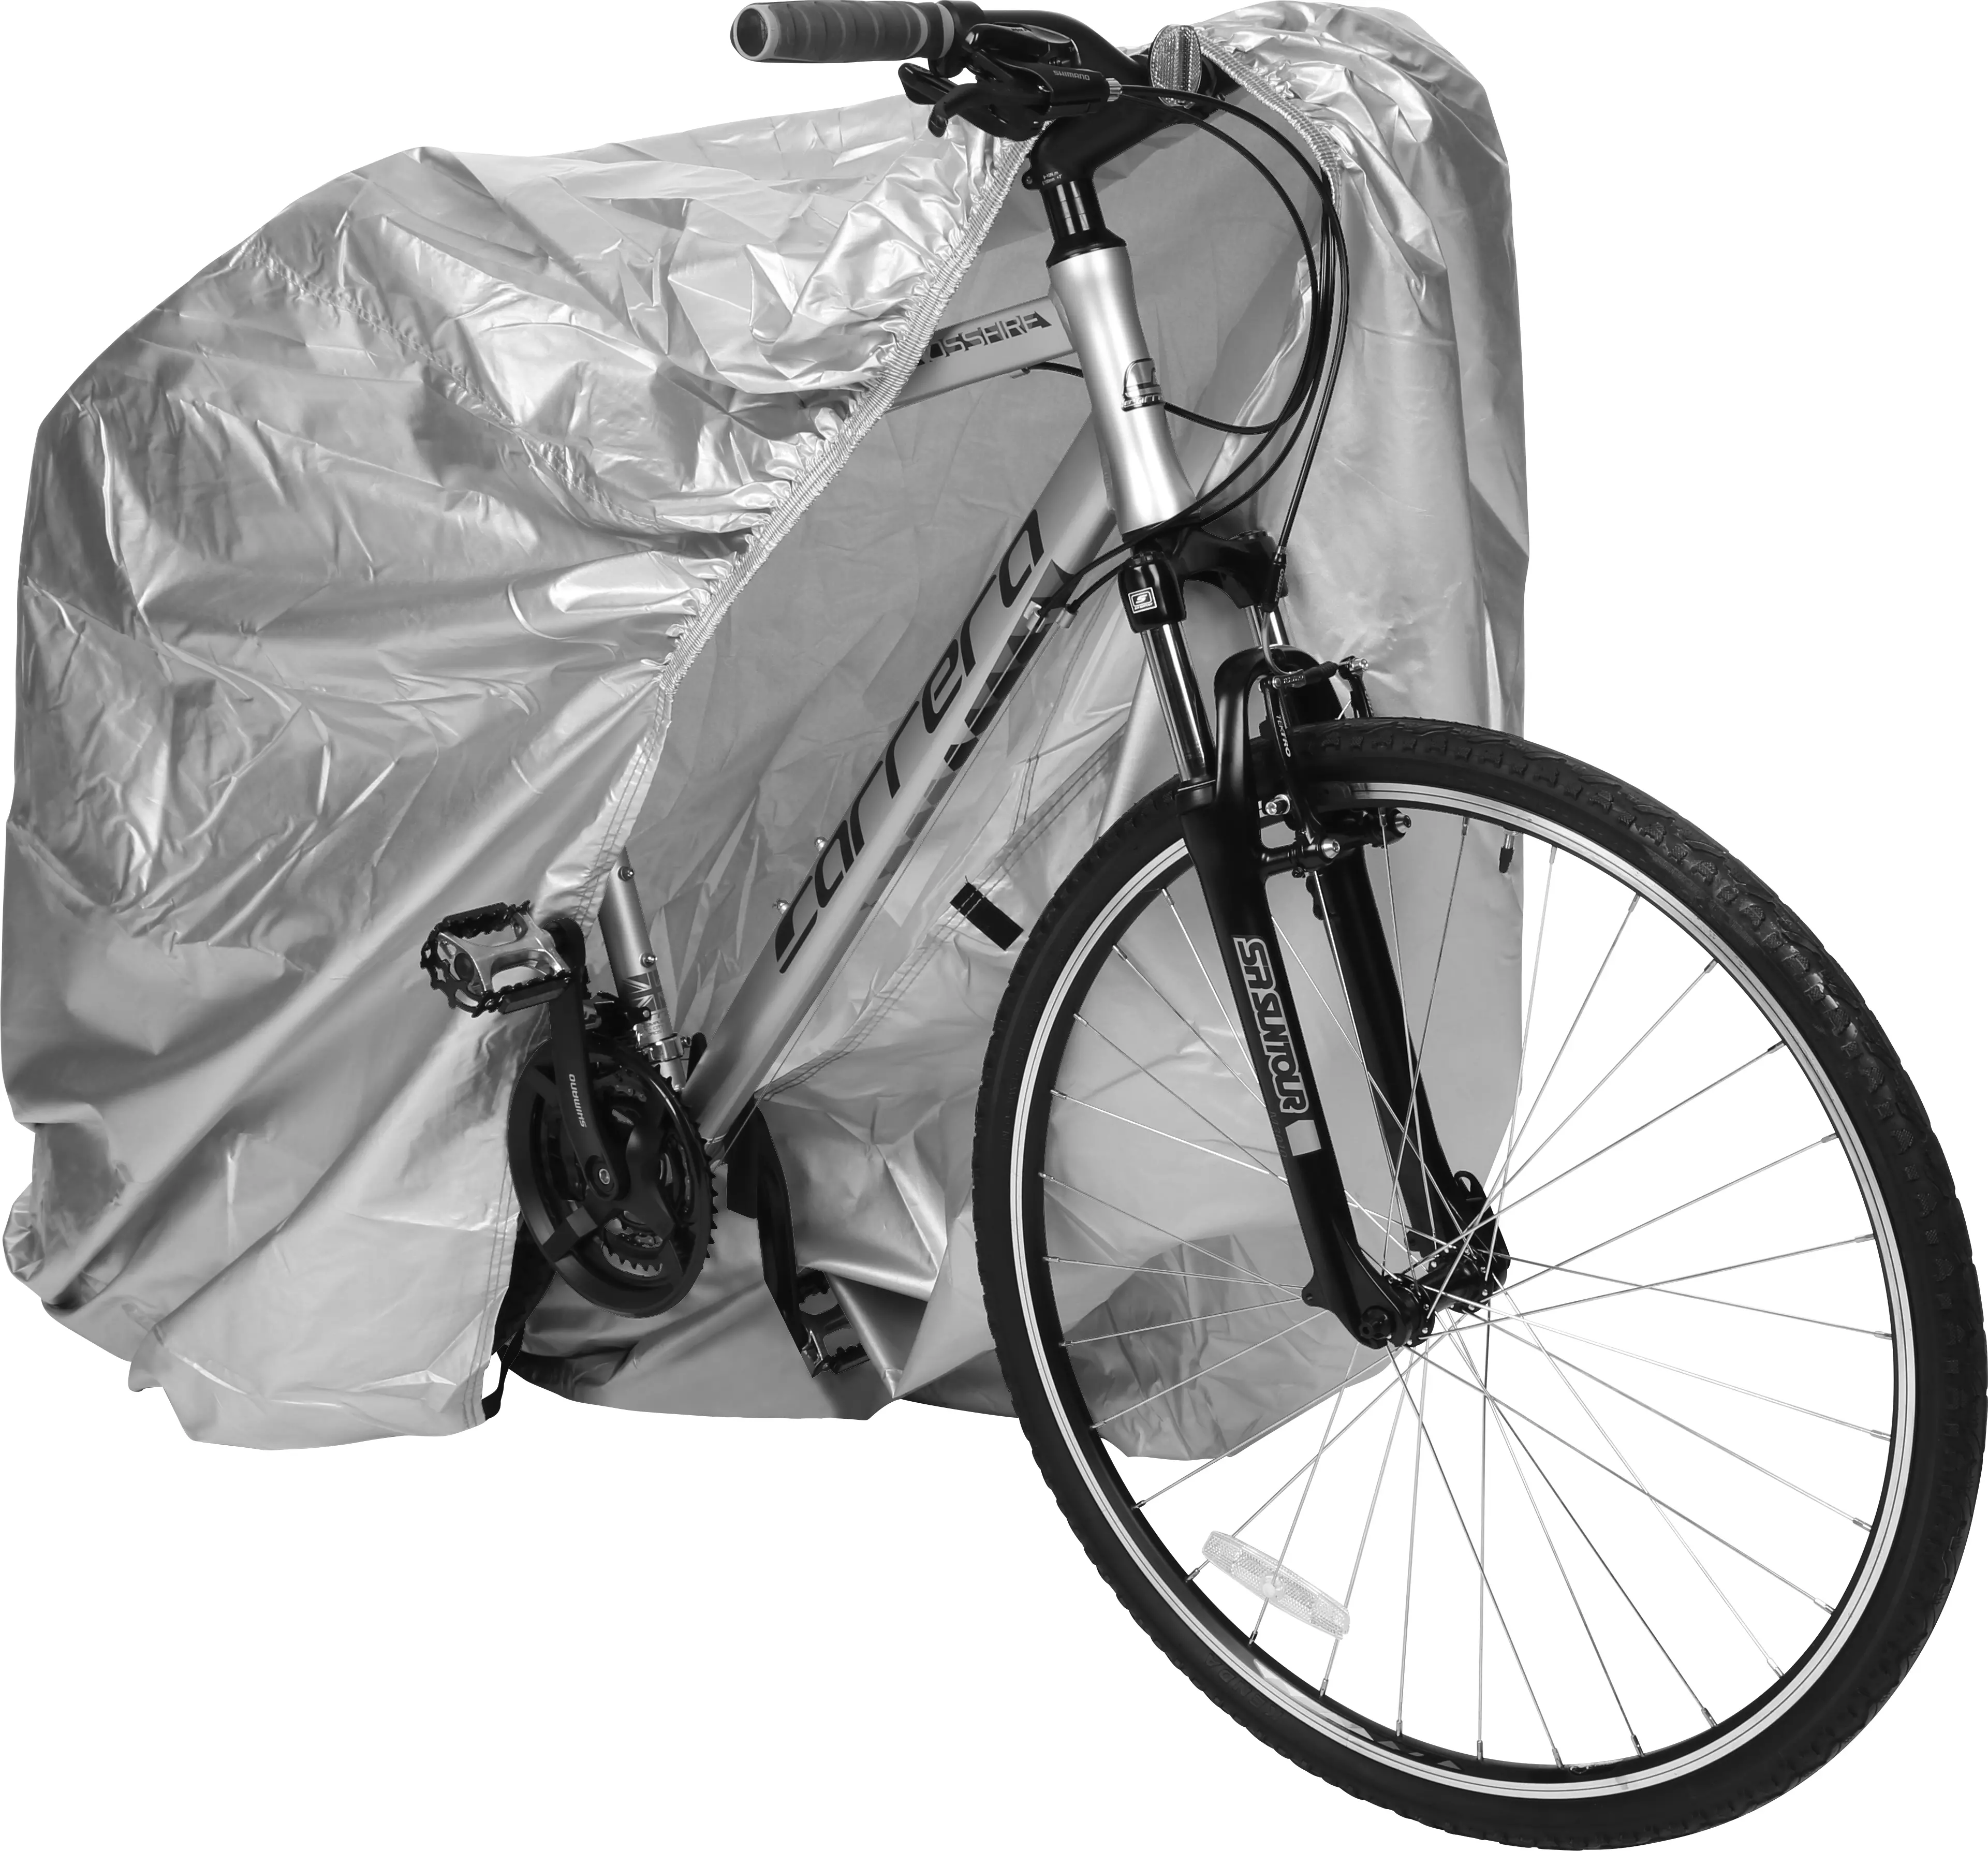 halfords cycle baskets